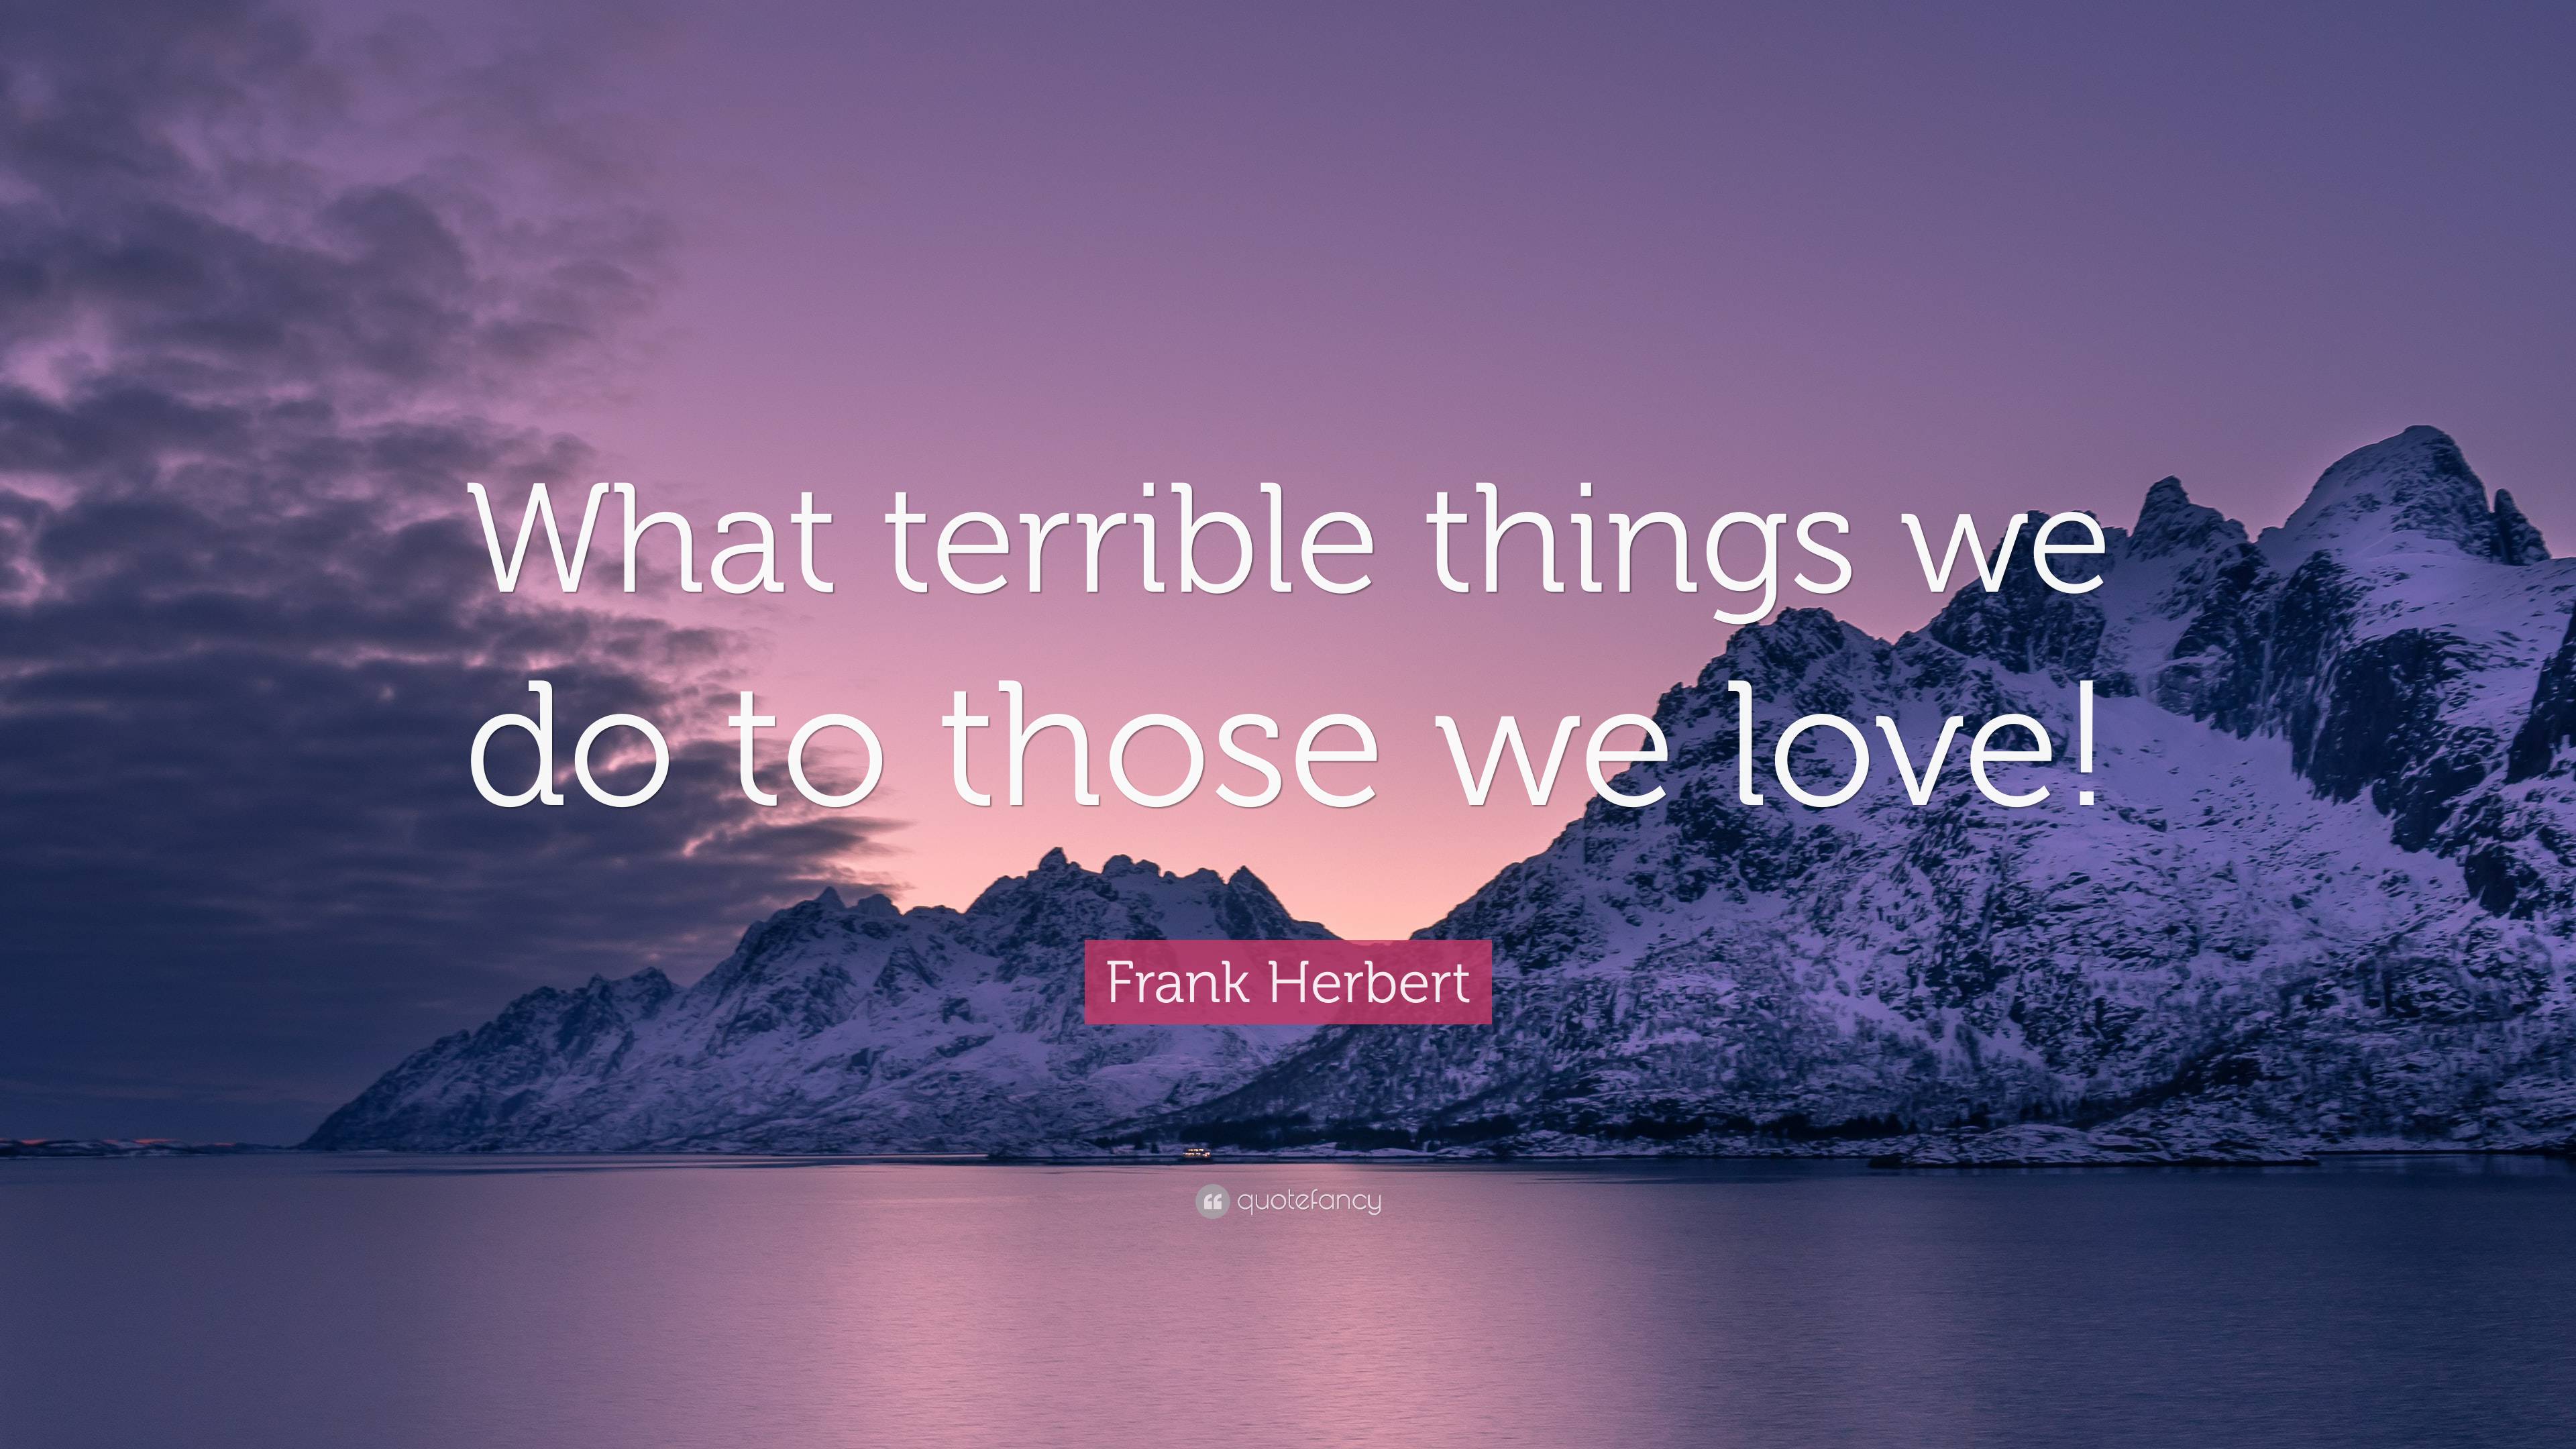 Frank Herbert Quote “what Terrible Things We Do To Those We Love” 4788